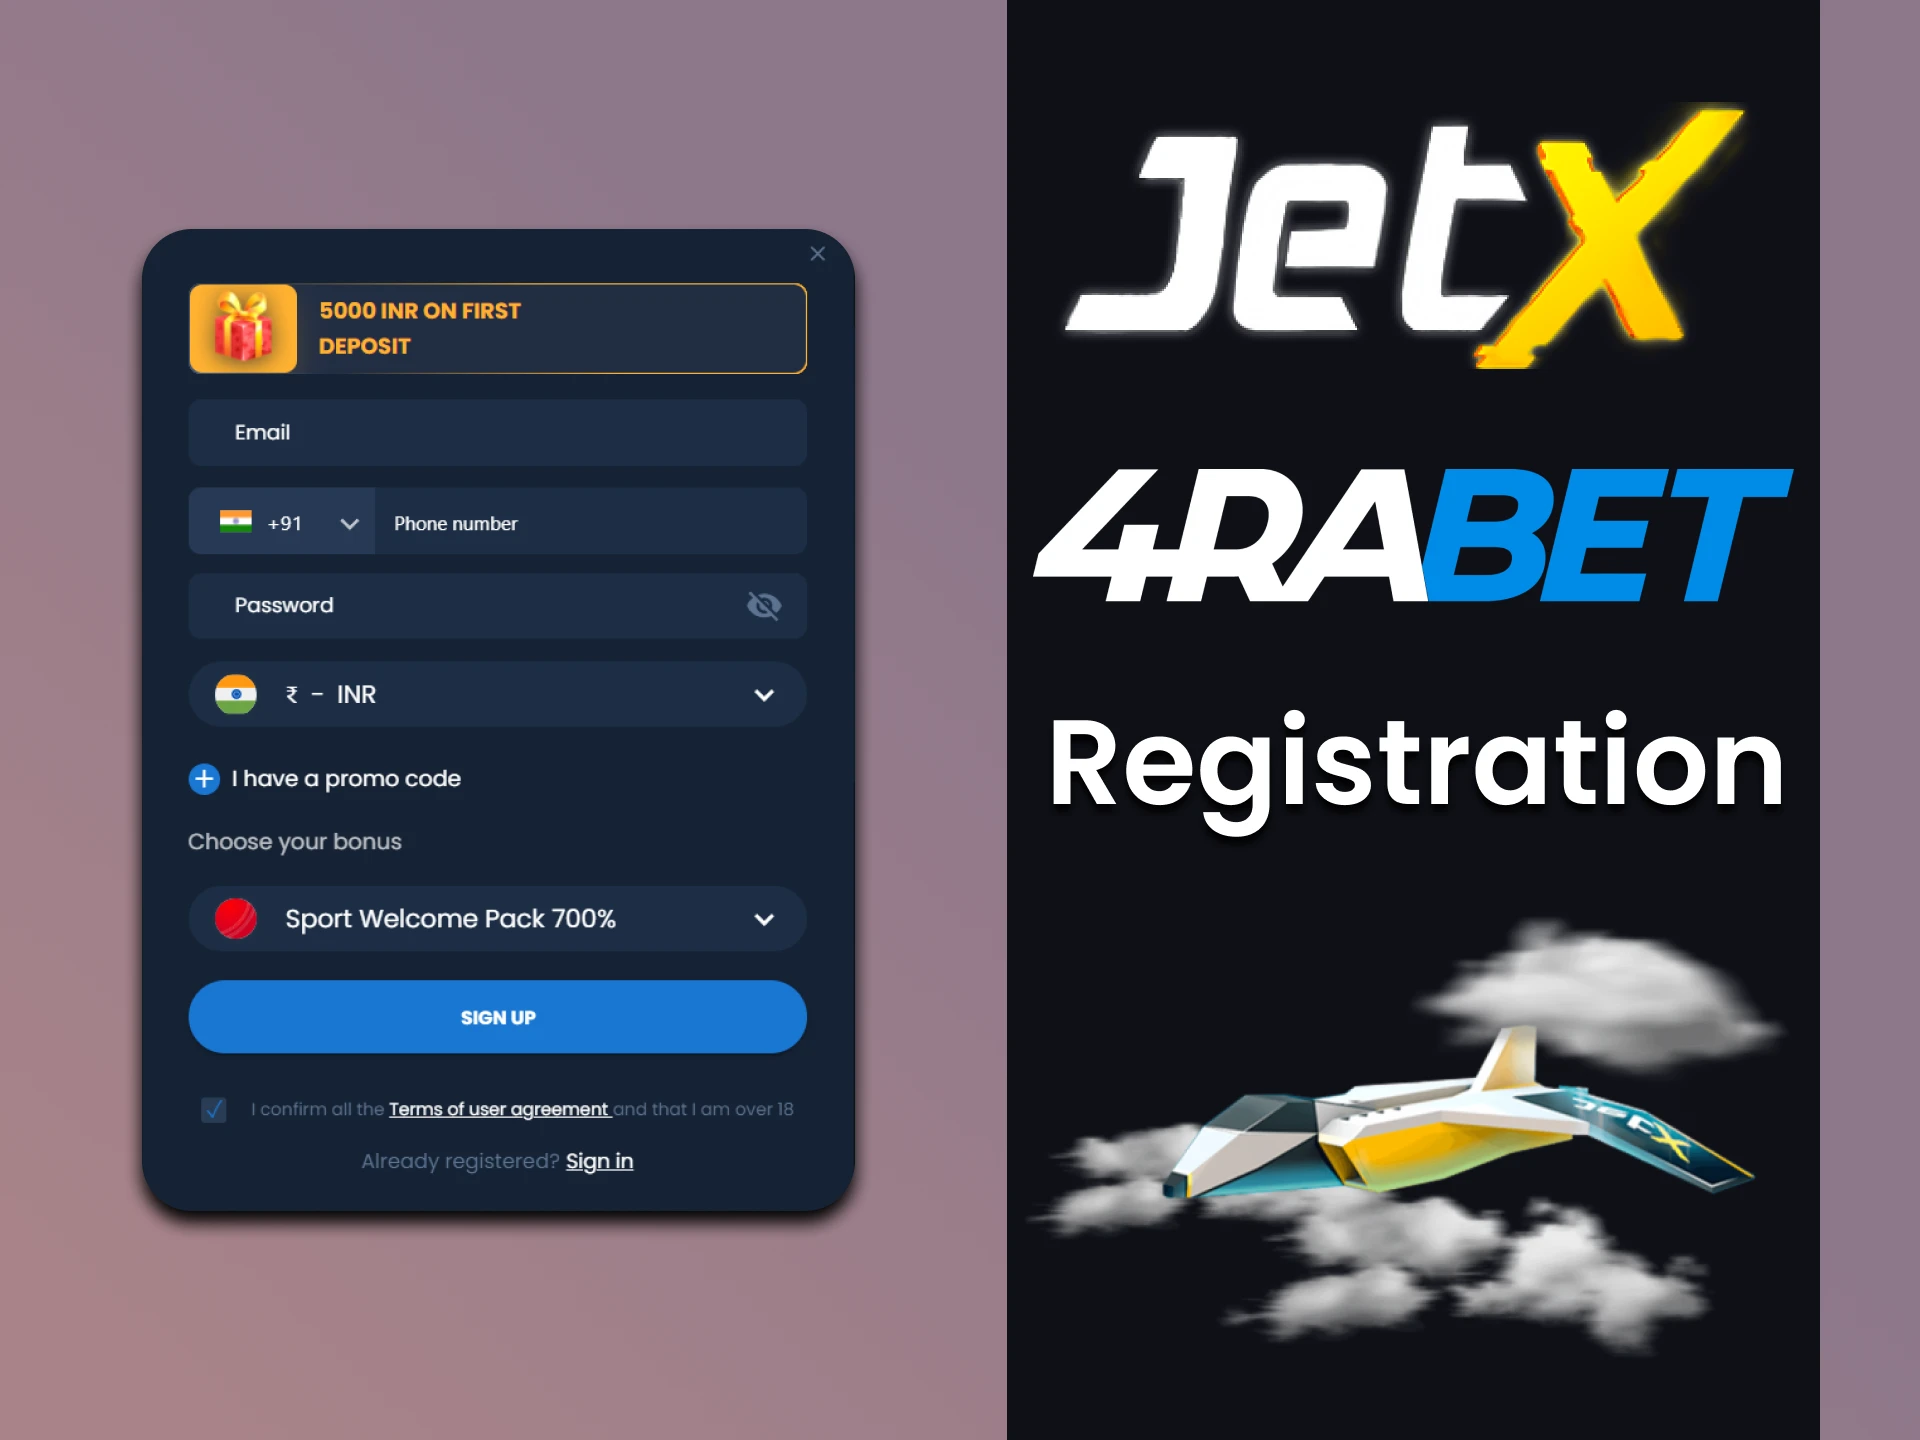 By registering at 4rabet you will be able to play JetX.